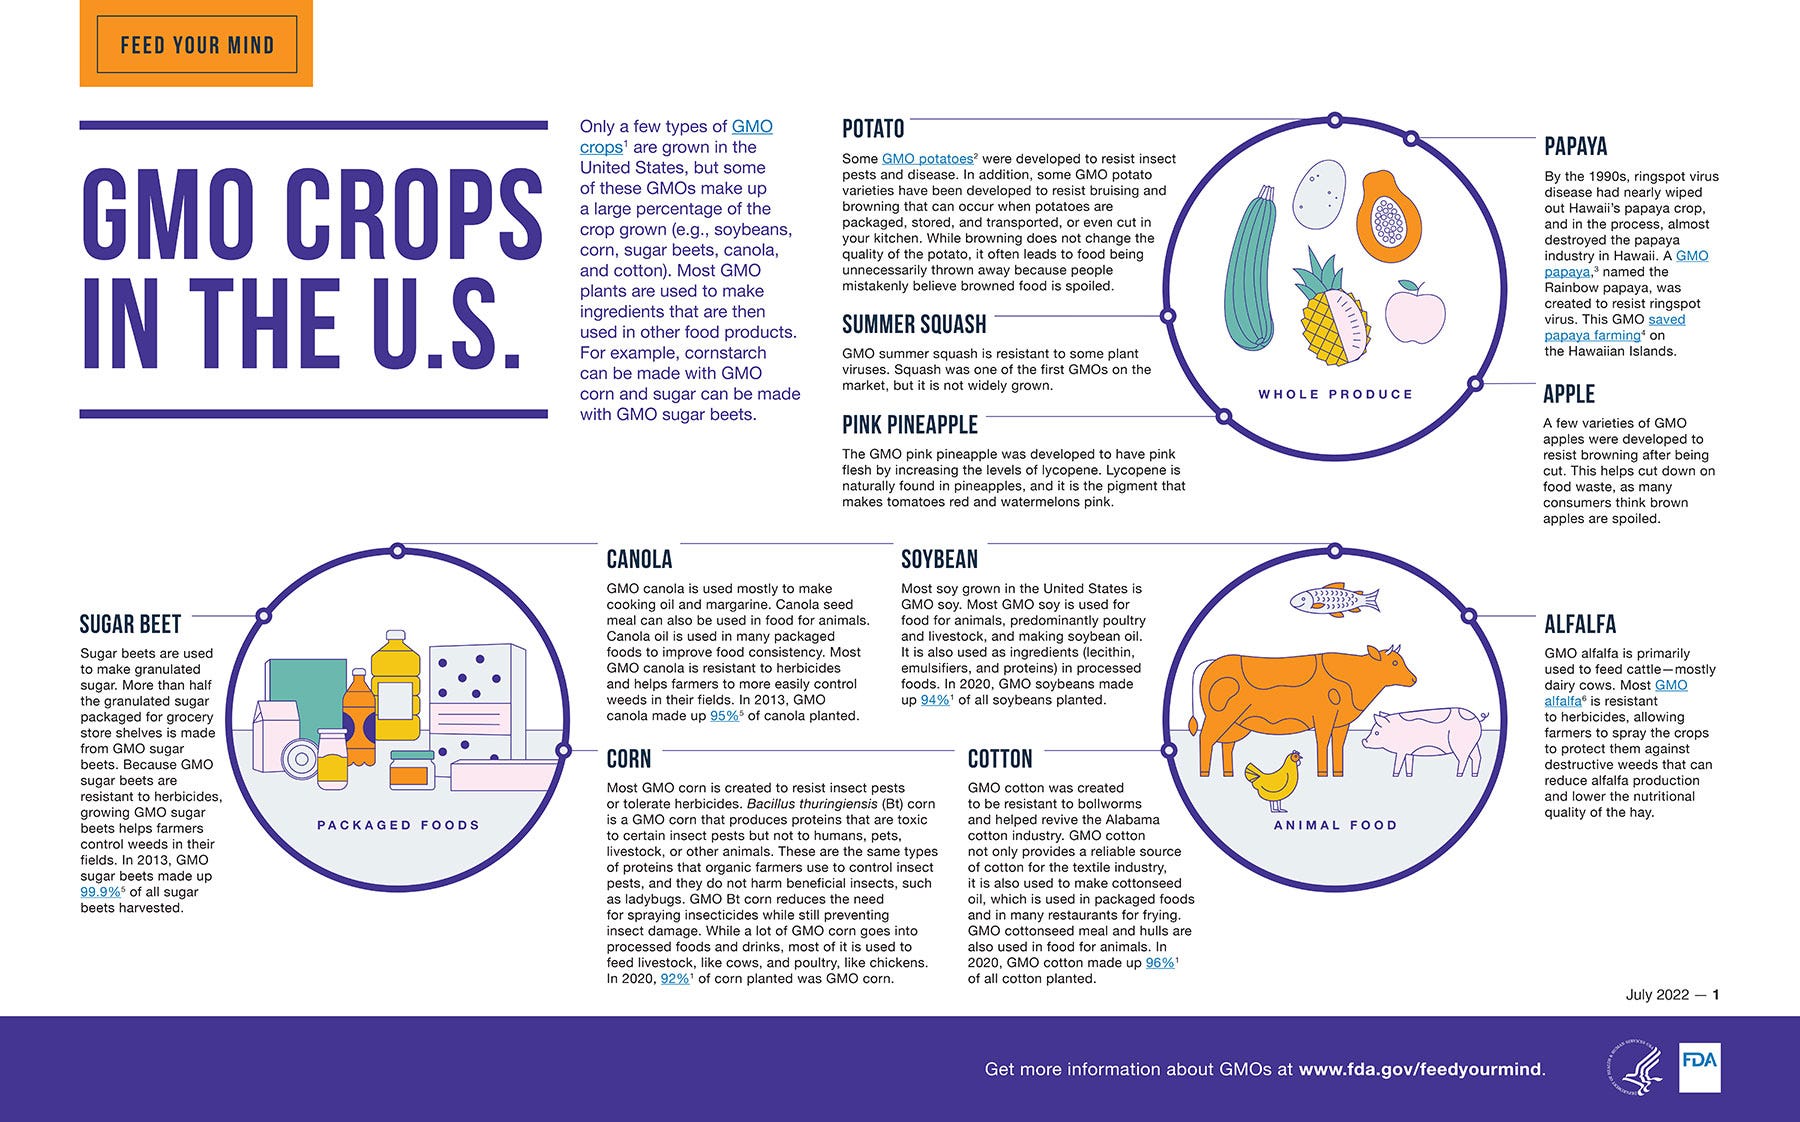 Infographic showing GMO crops grown in the United States